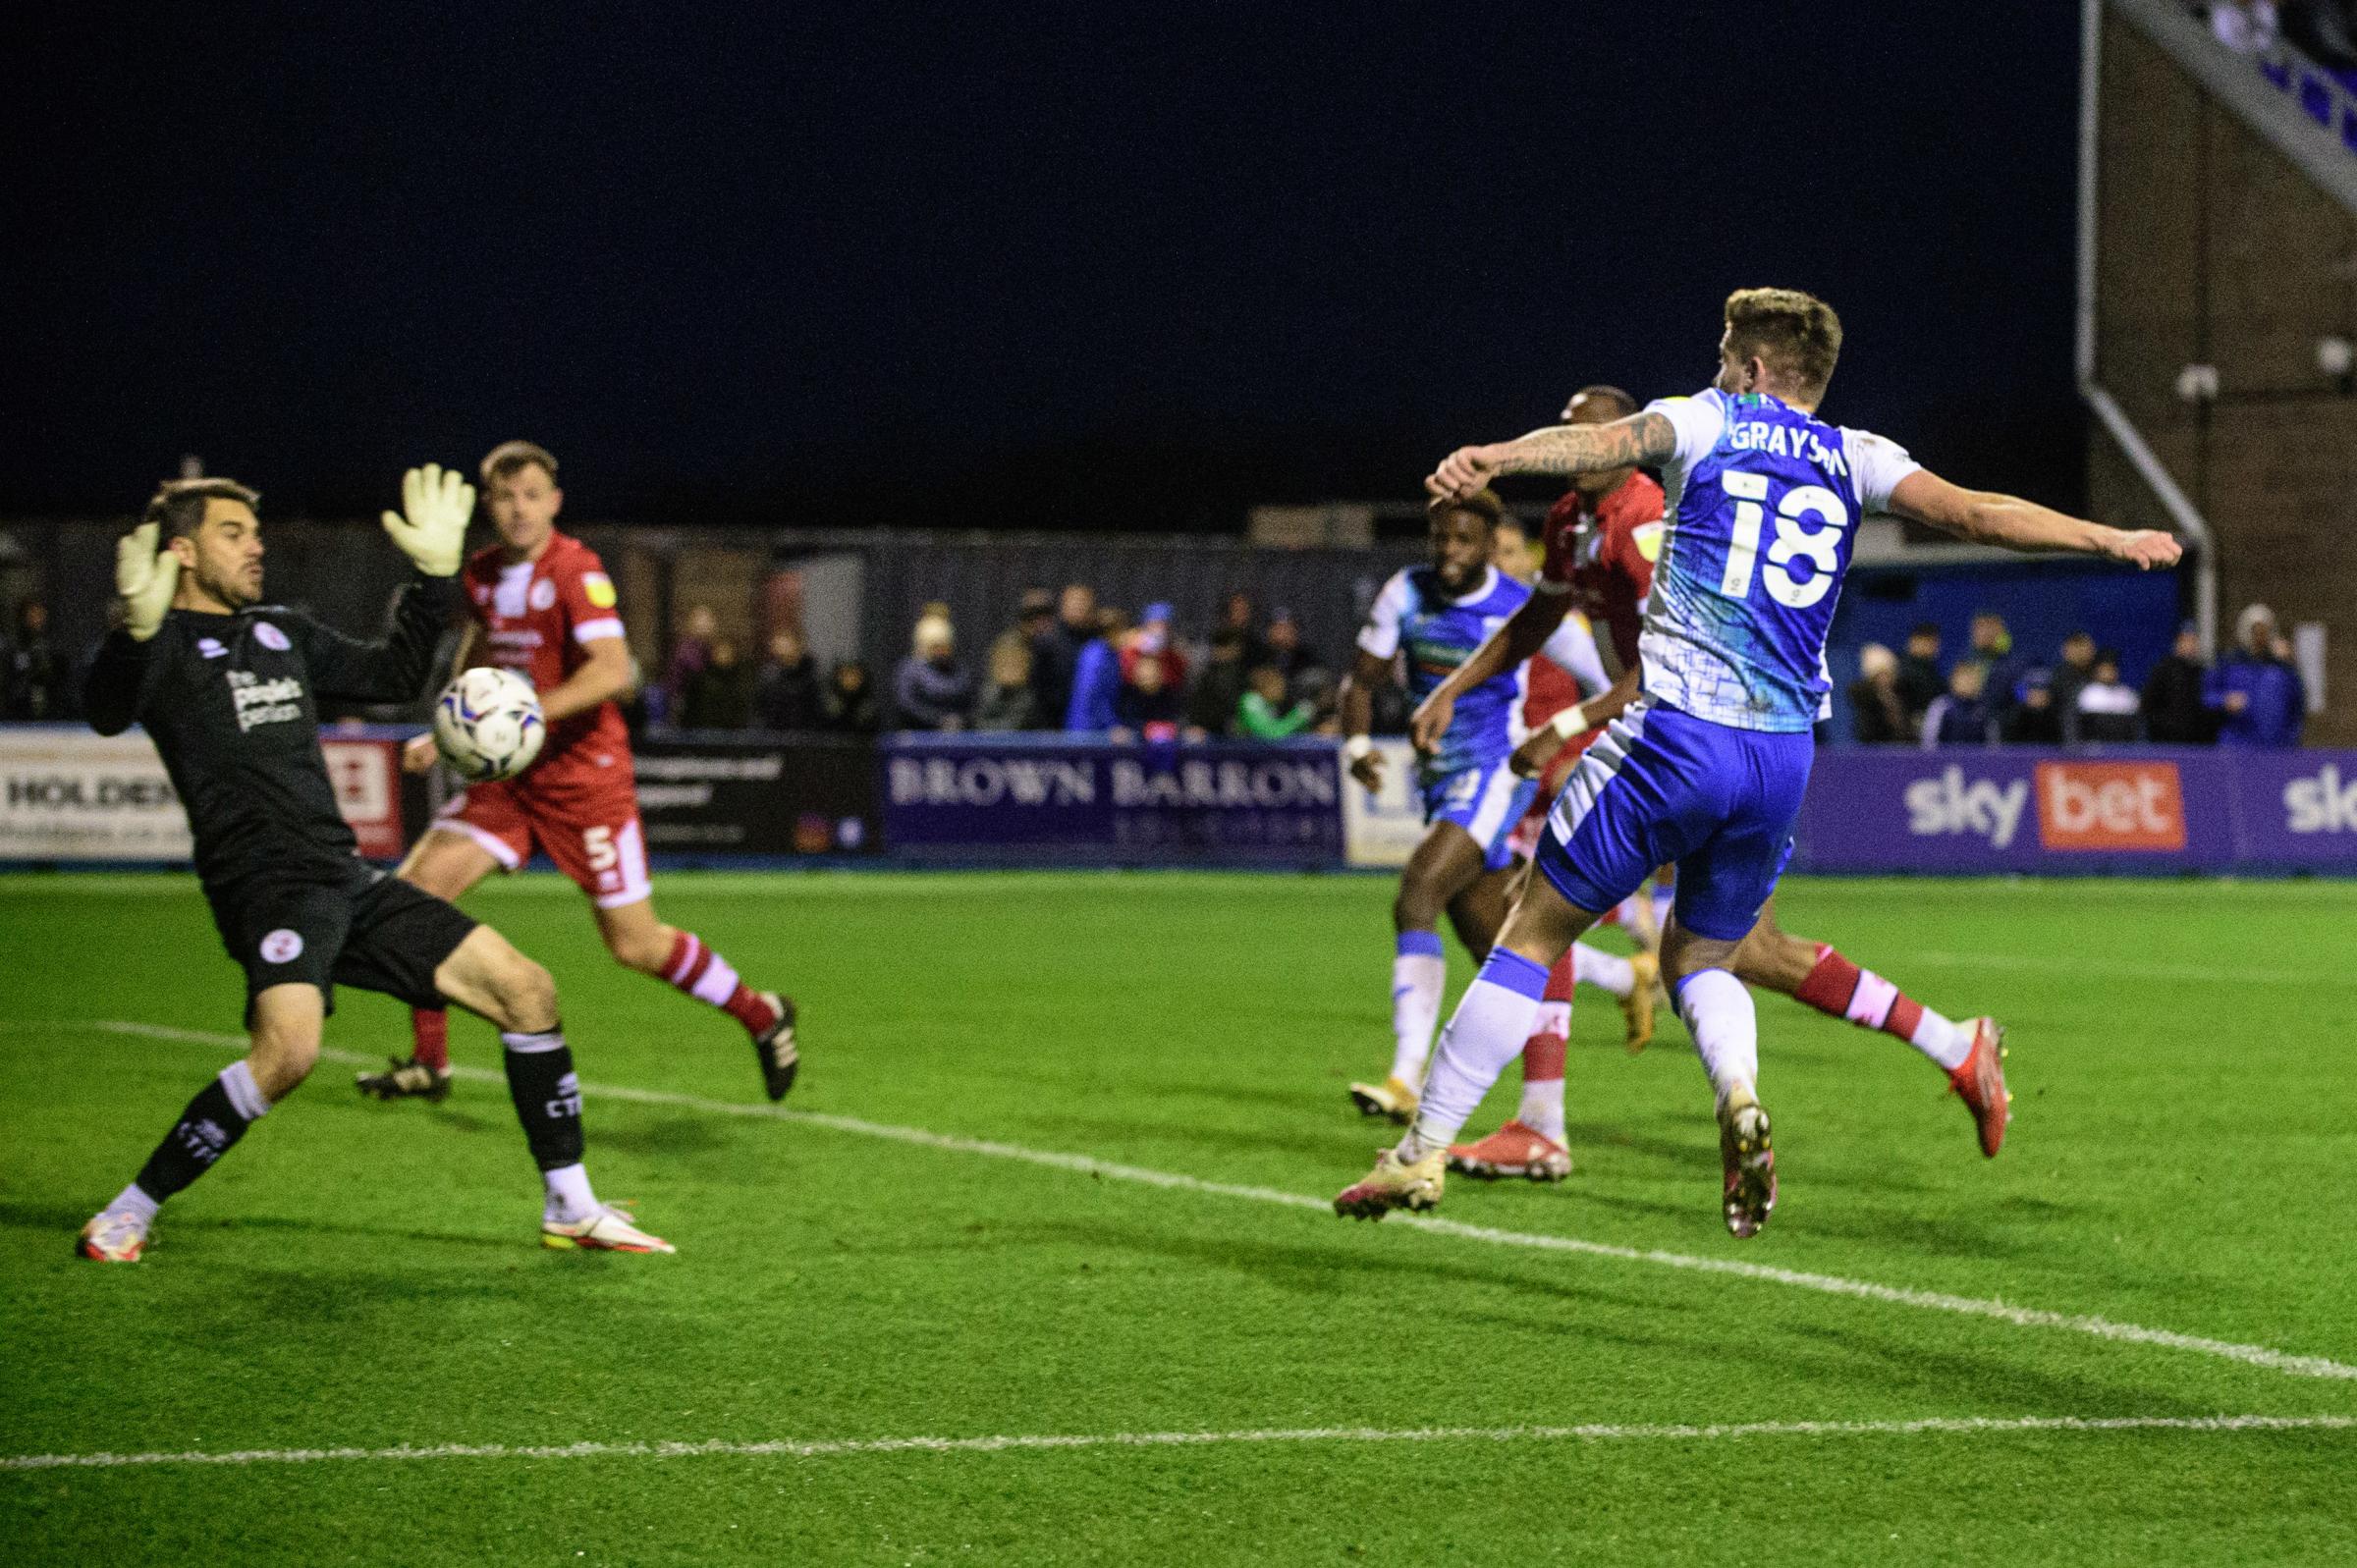 ATTEMPT: Joe Grayson of Barrow FC tries a shot on goal only for Glenn Morris of Crawley Town FC to save it at Holker Street. (Ian Charles | MI News)